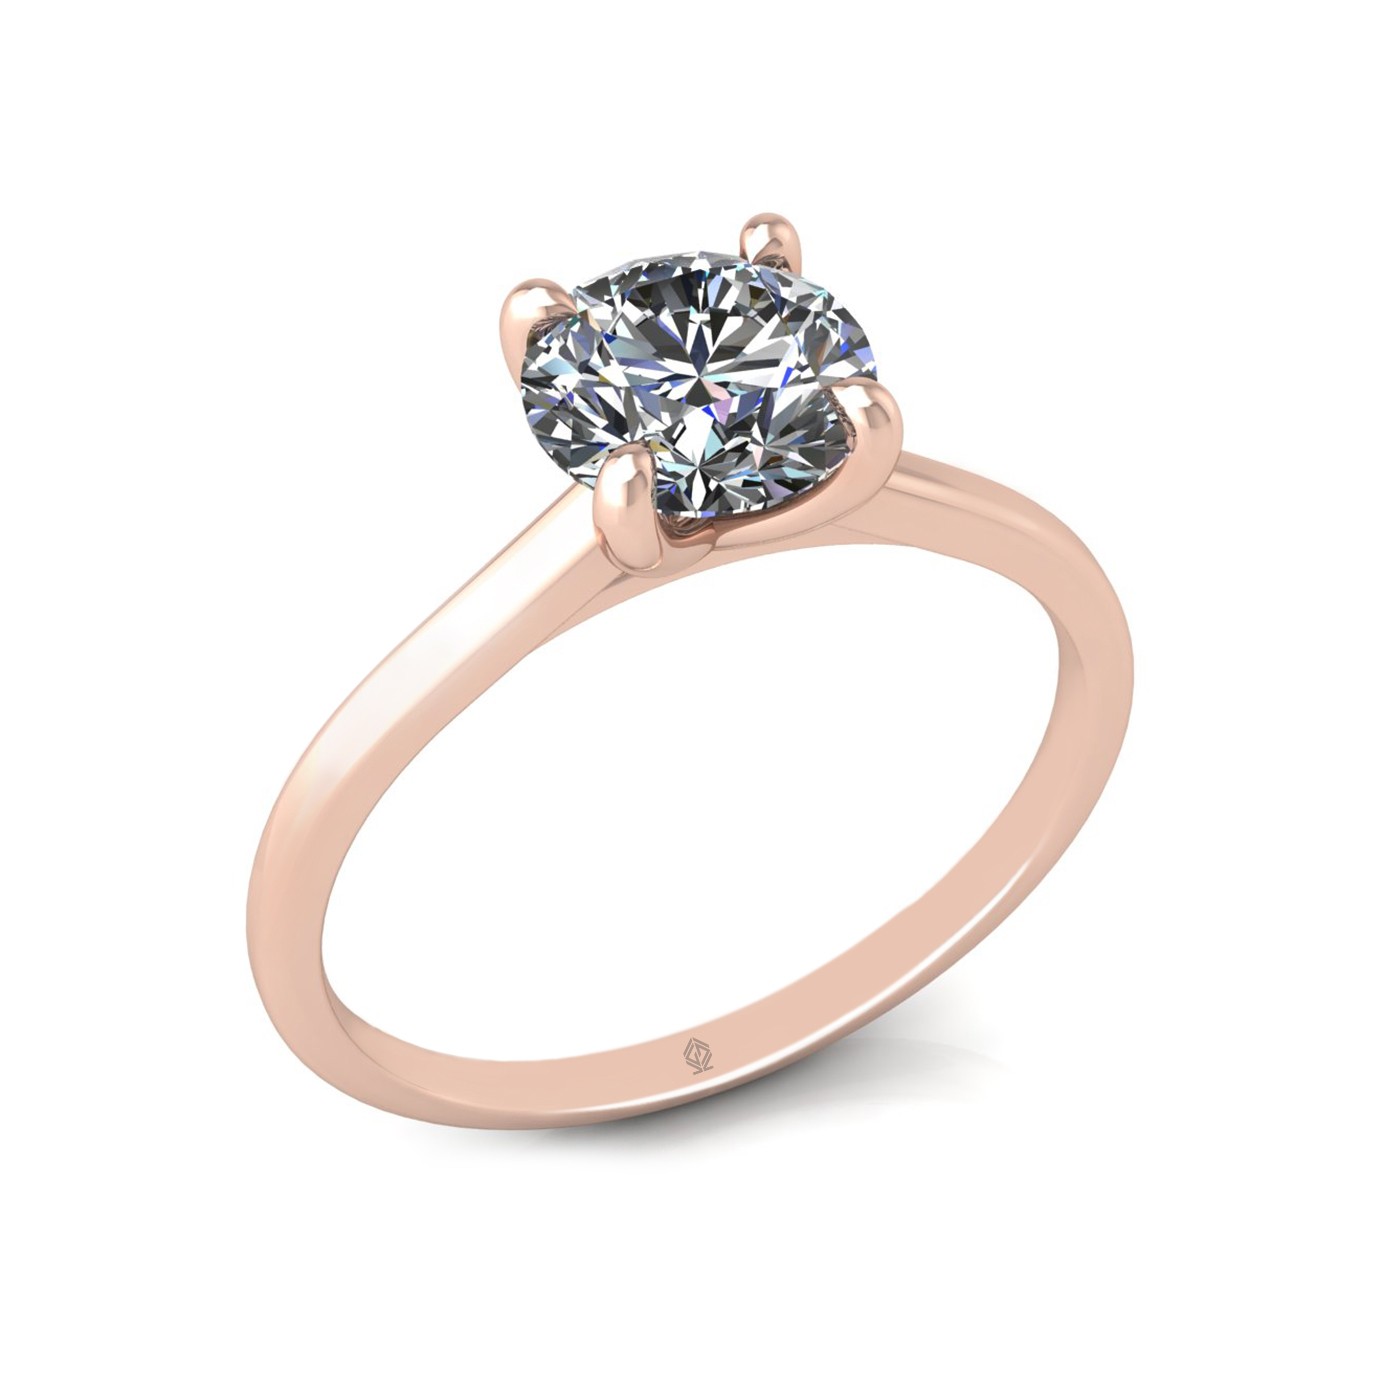 18k rose gold 1.0ct 4 prongs solitaire round cut diamond engagement ring with whisper thin band